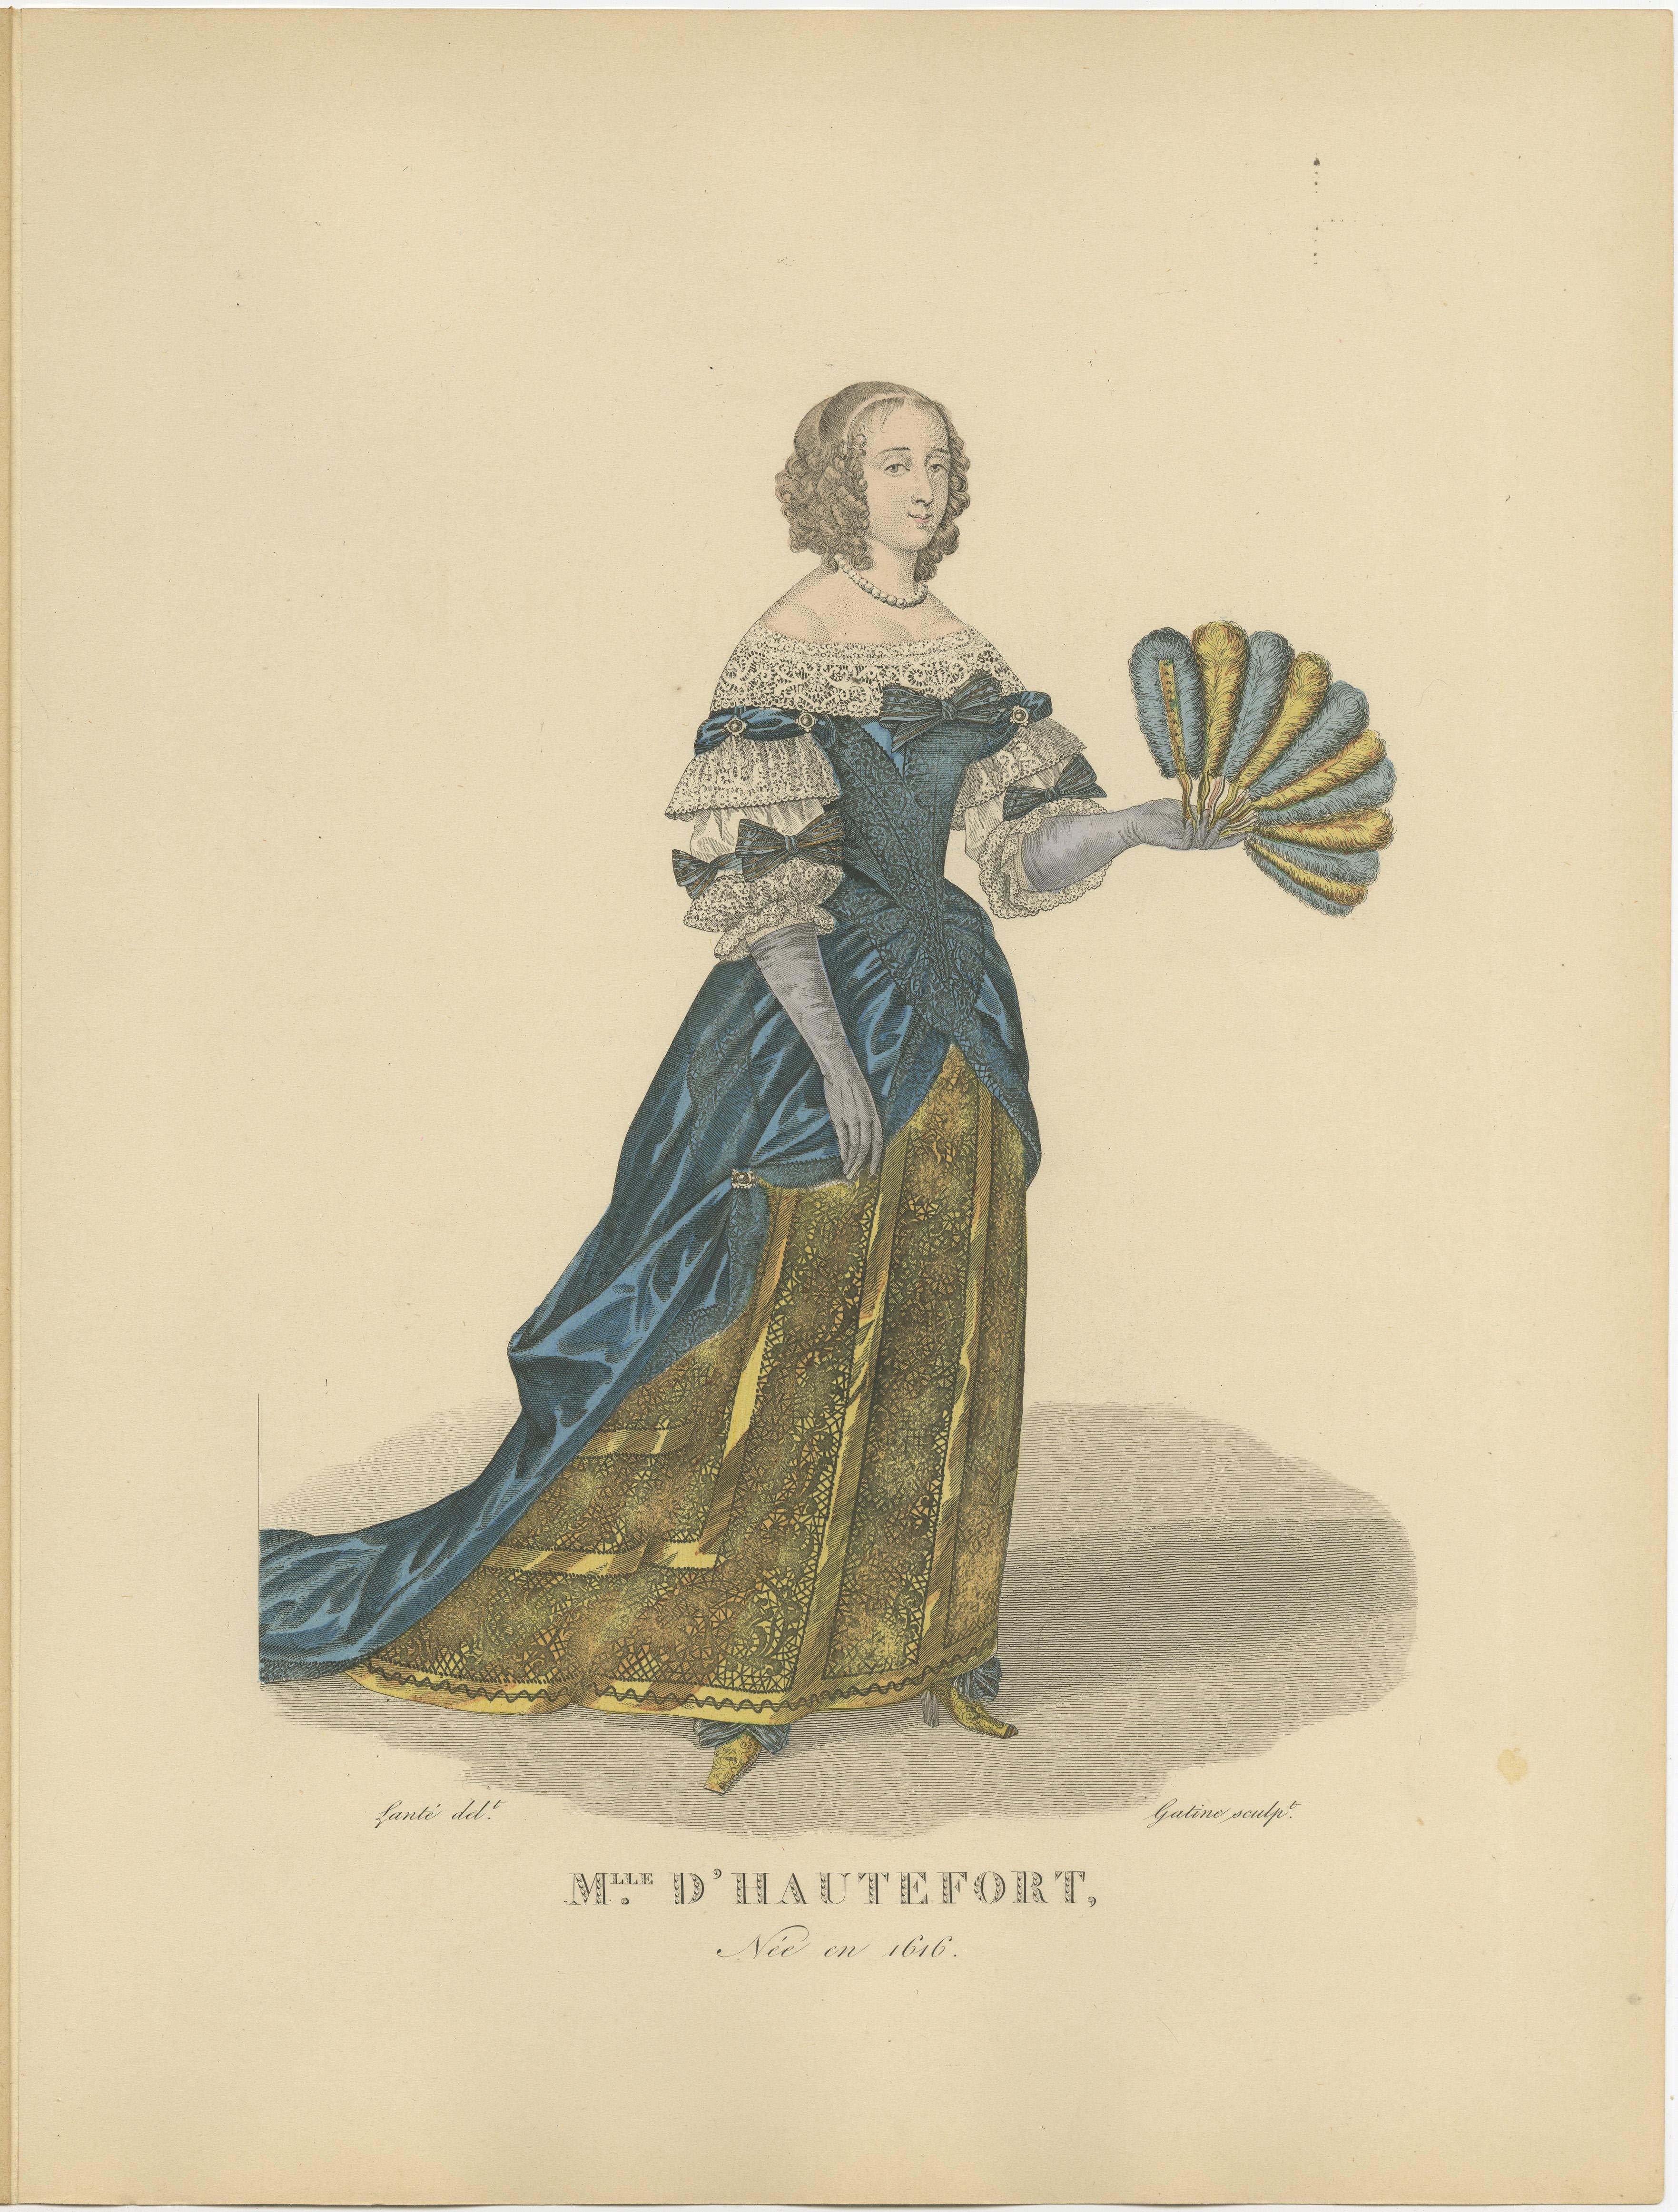 Antique print titled 'MARIE DE HAUTEFORT' Original antique print of Marie de Hautefort.

Marie de Hautefort (1616 – 1691), was a French noble and lady-in-waiting, a trusted confidante and adviser of King Louis XIII of France. They did not have a